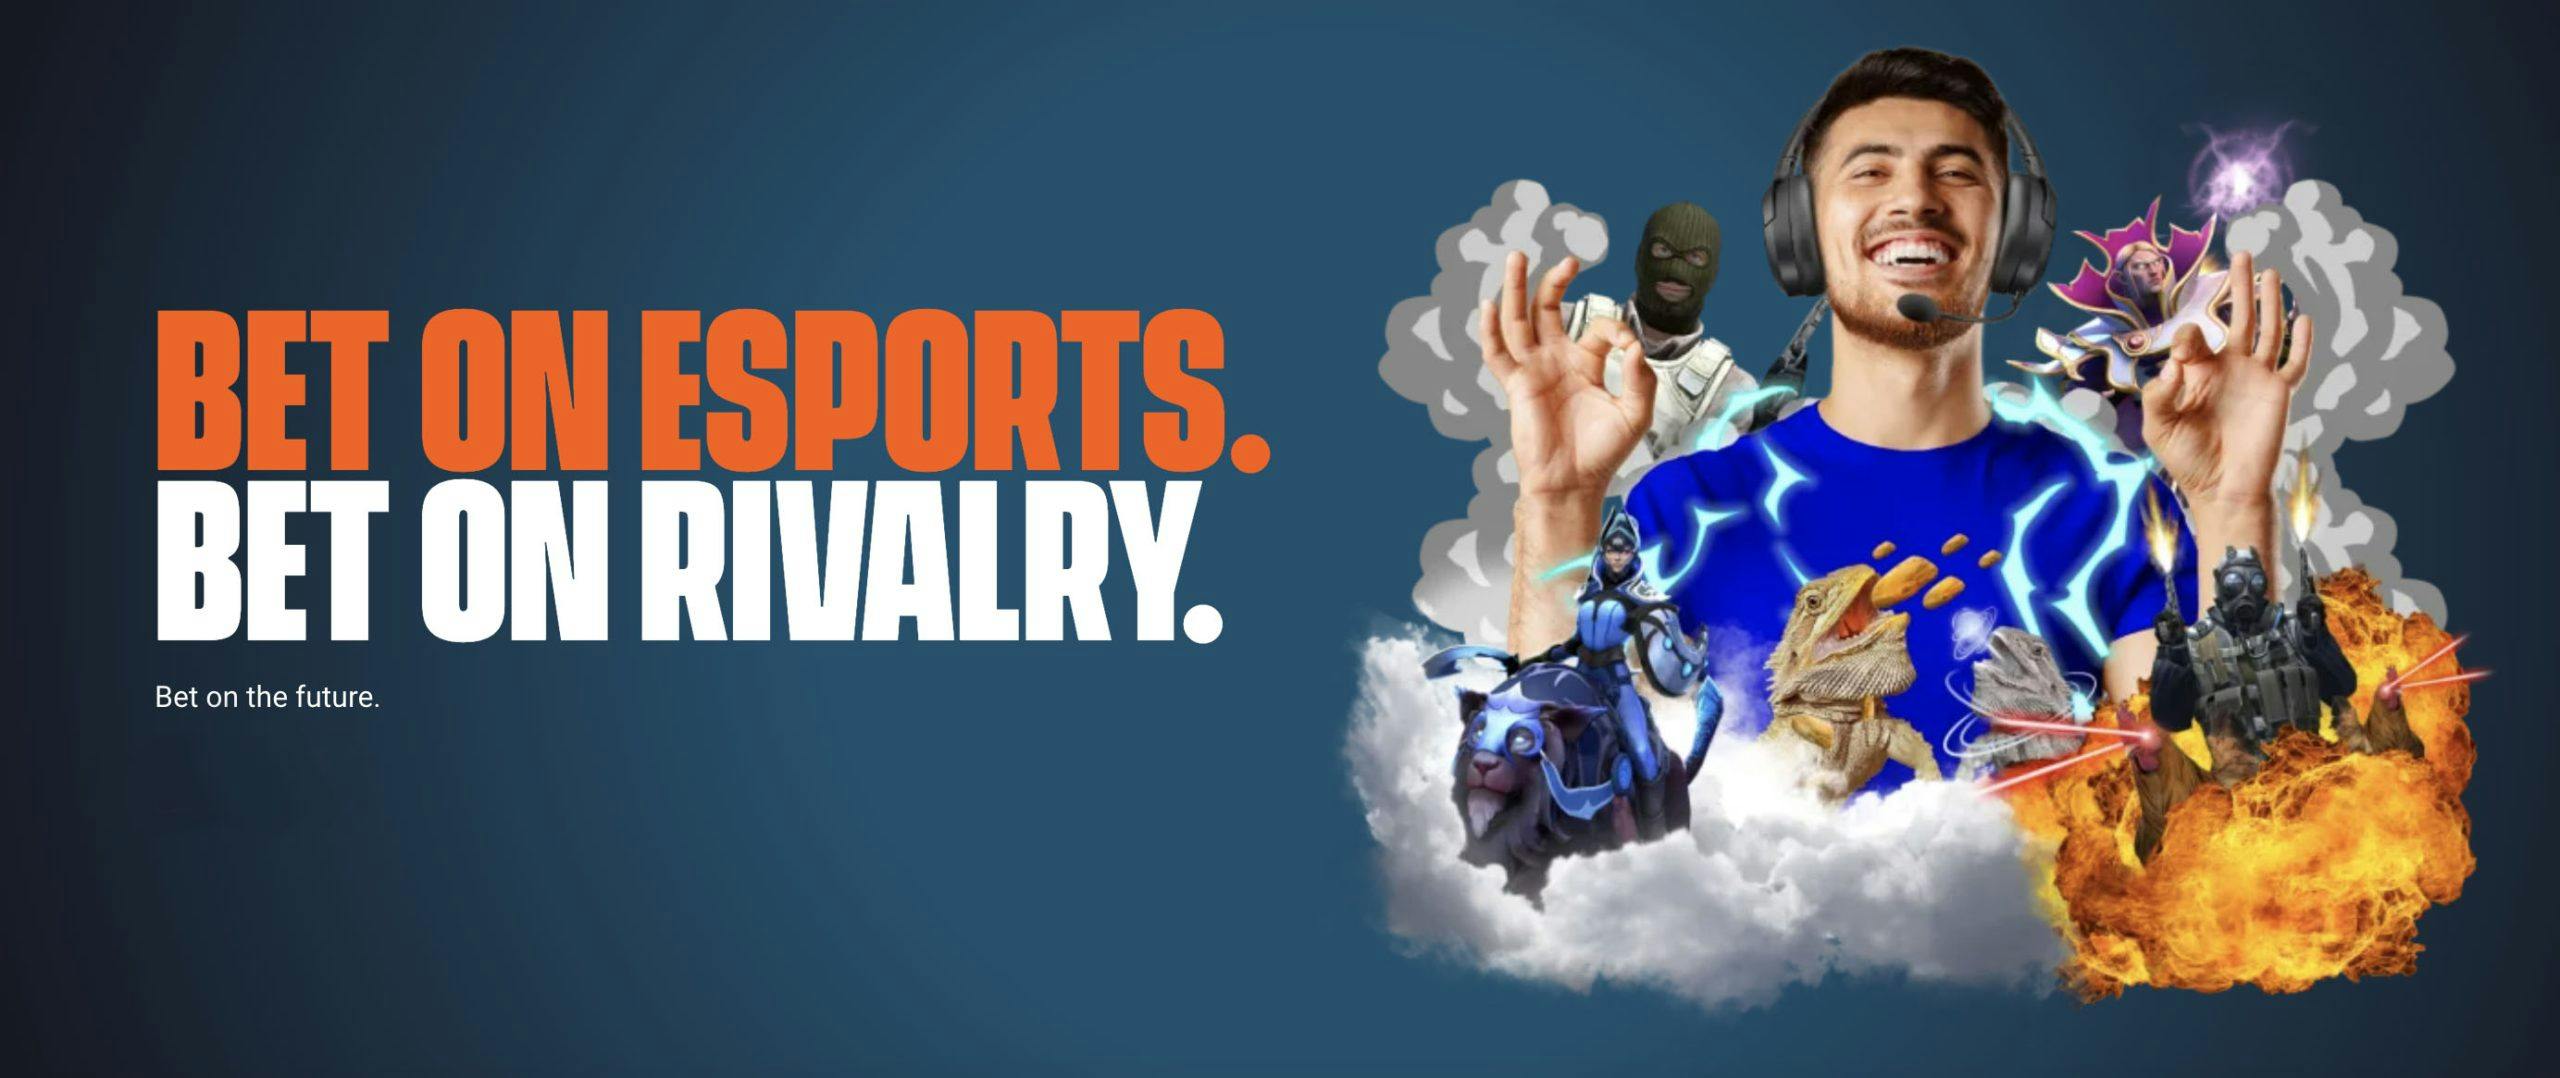 Bet on esports. Bet on Rivalry.